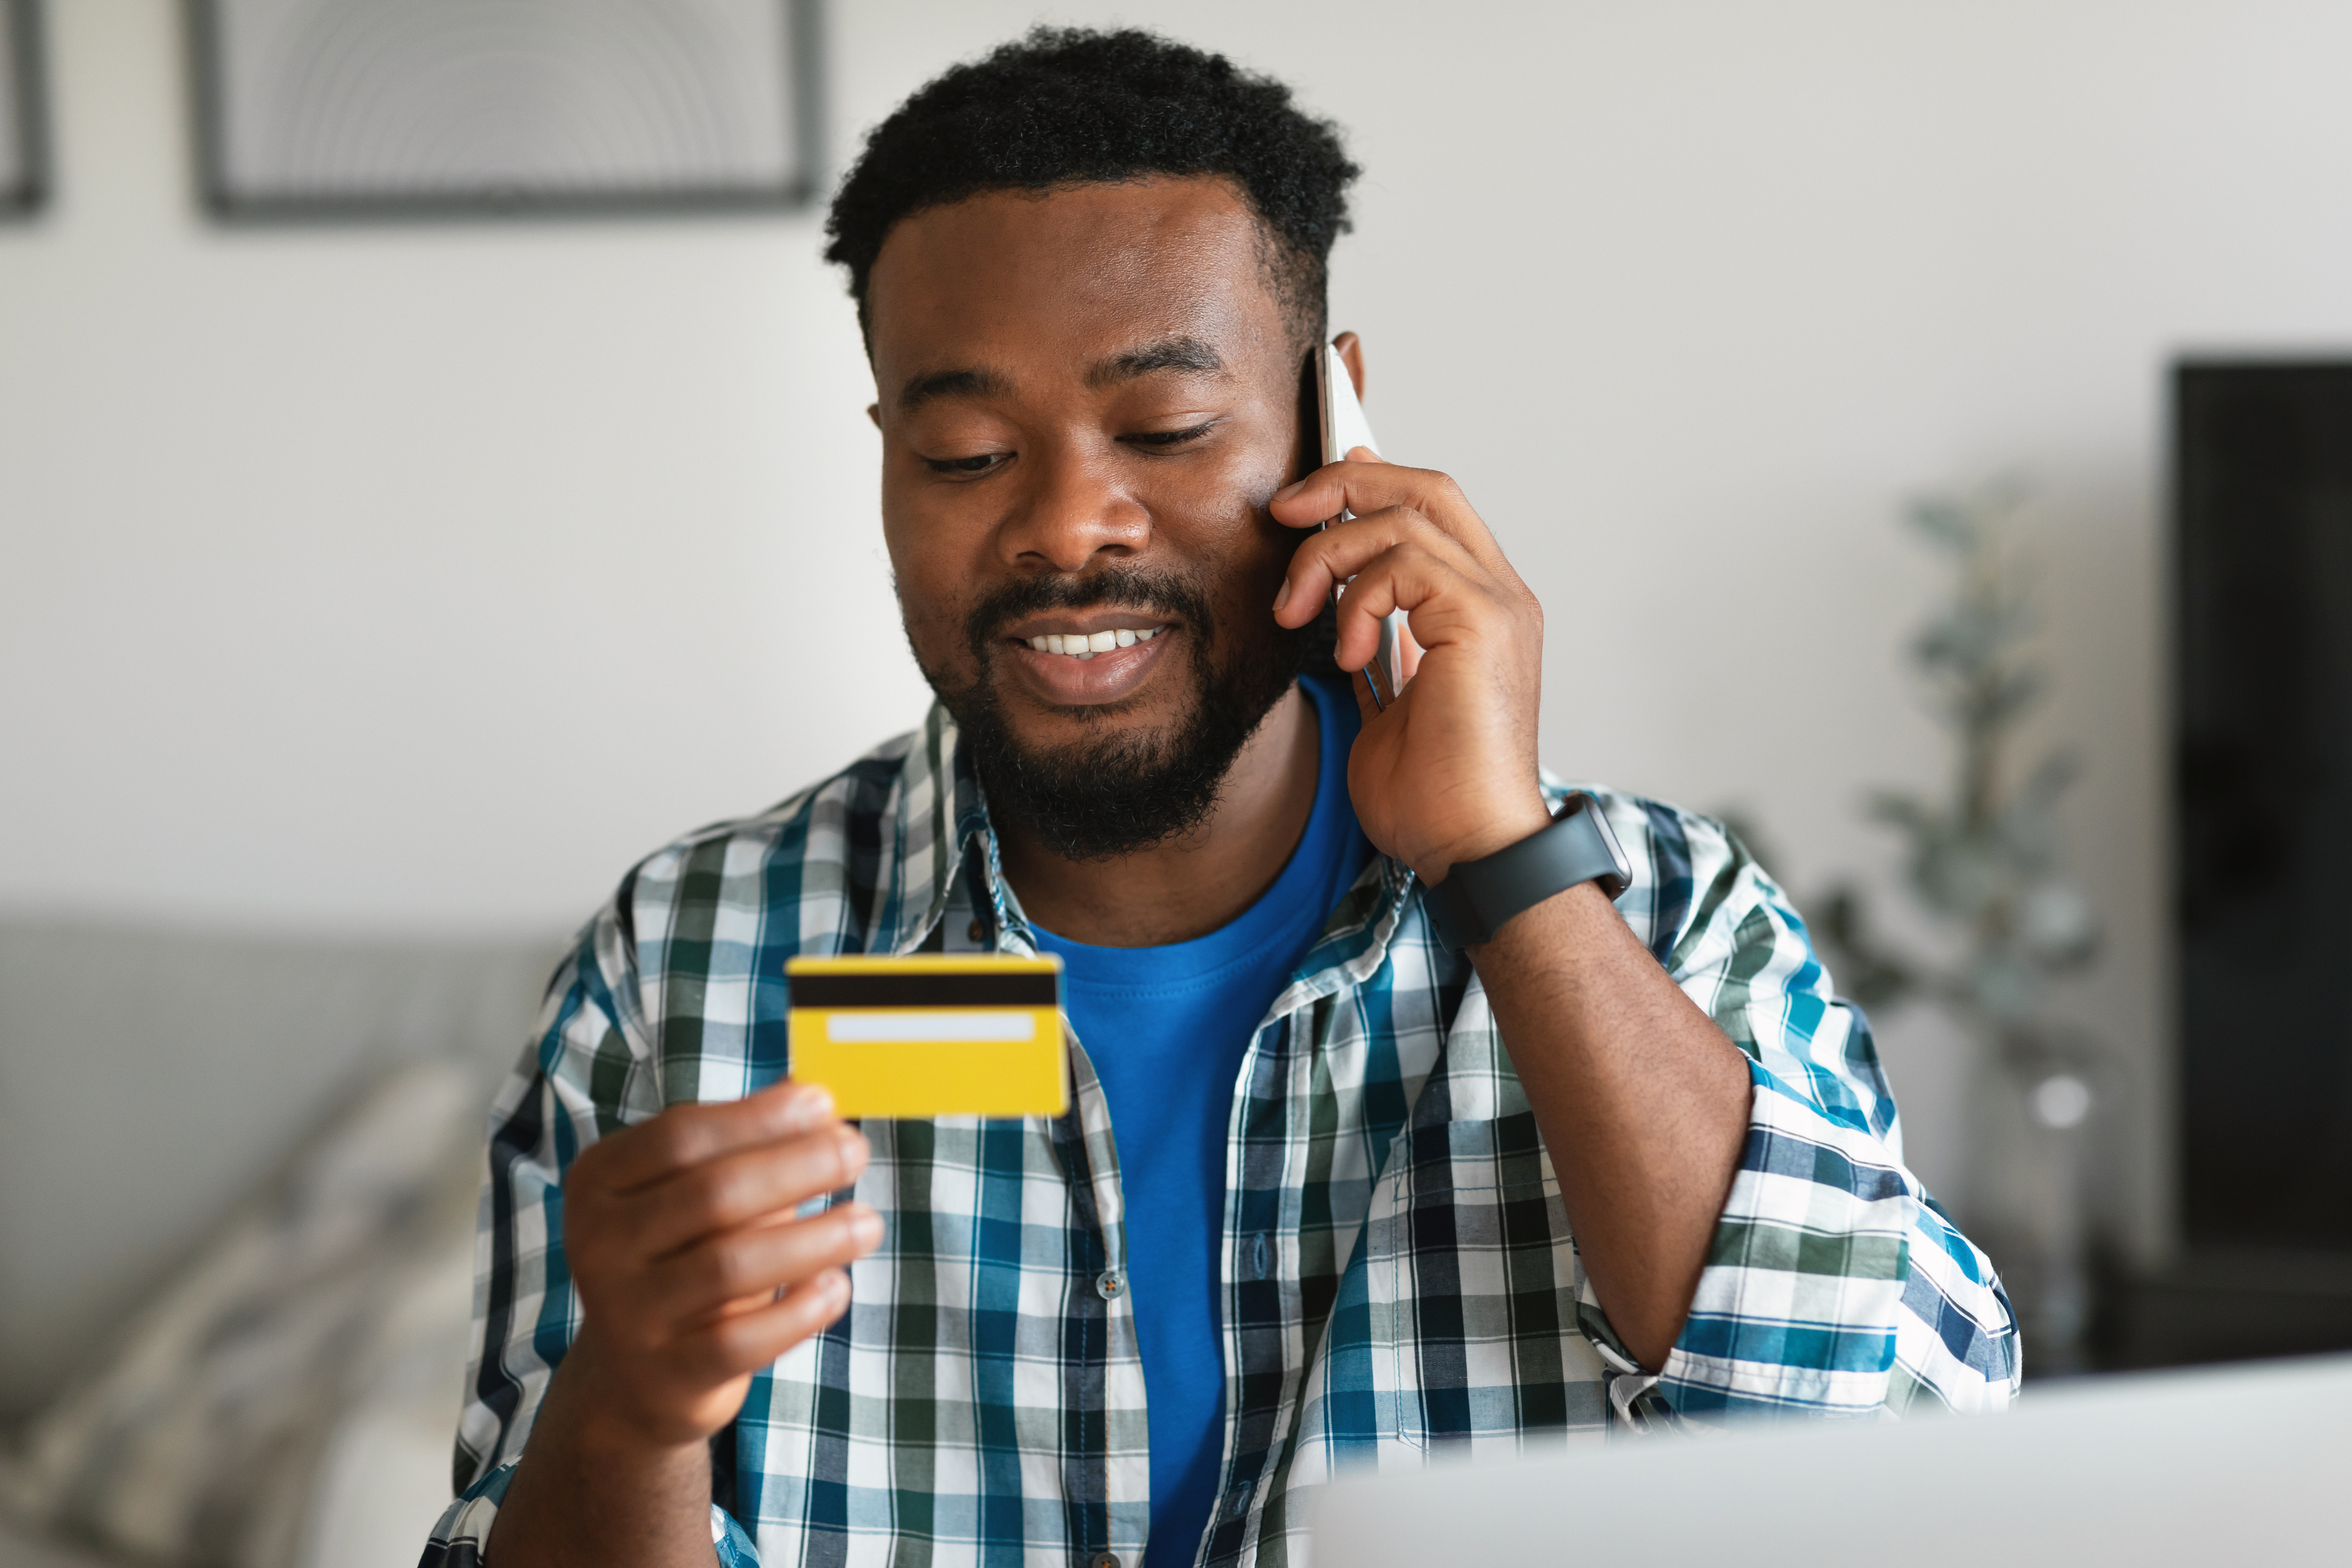 Man with phone to his ear in one hand, looking at the credit card he is holding in the other hand